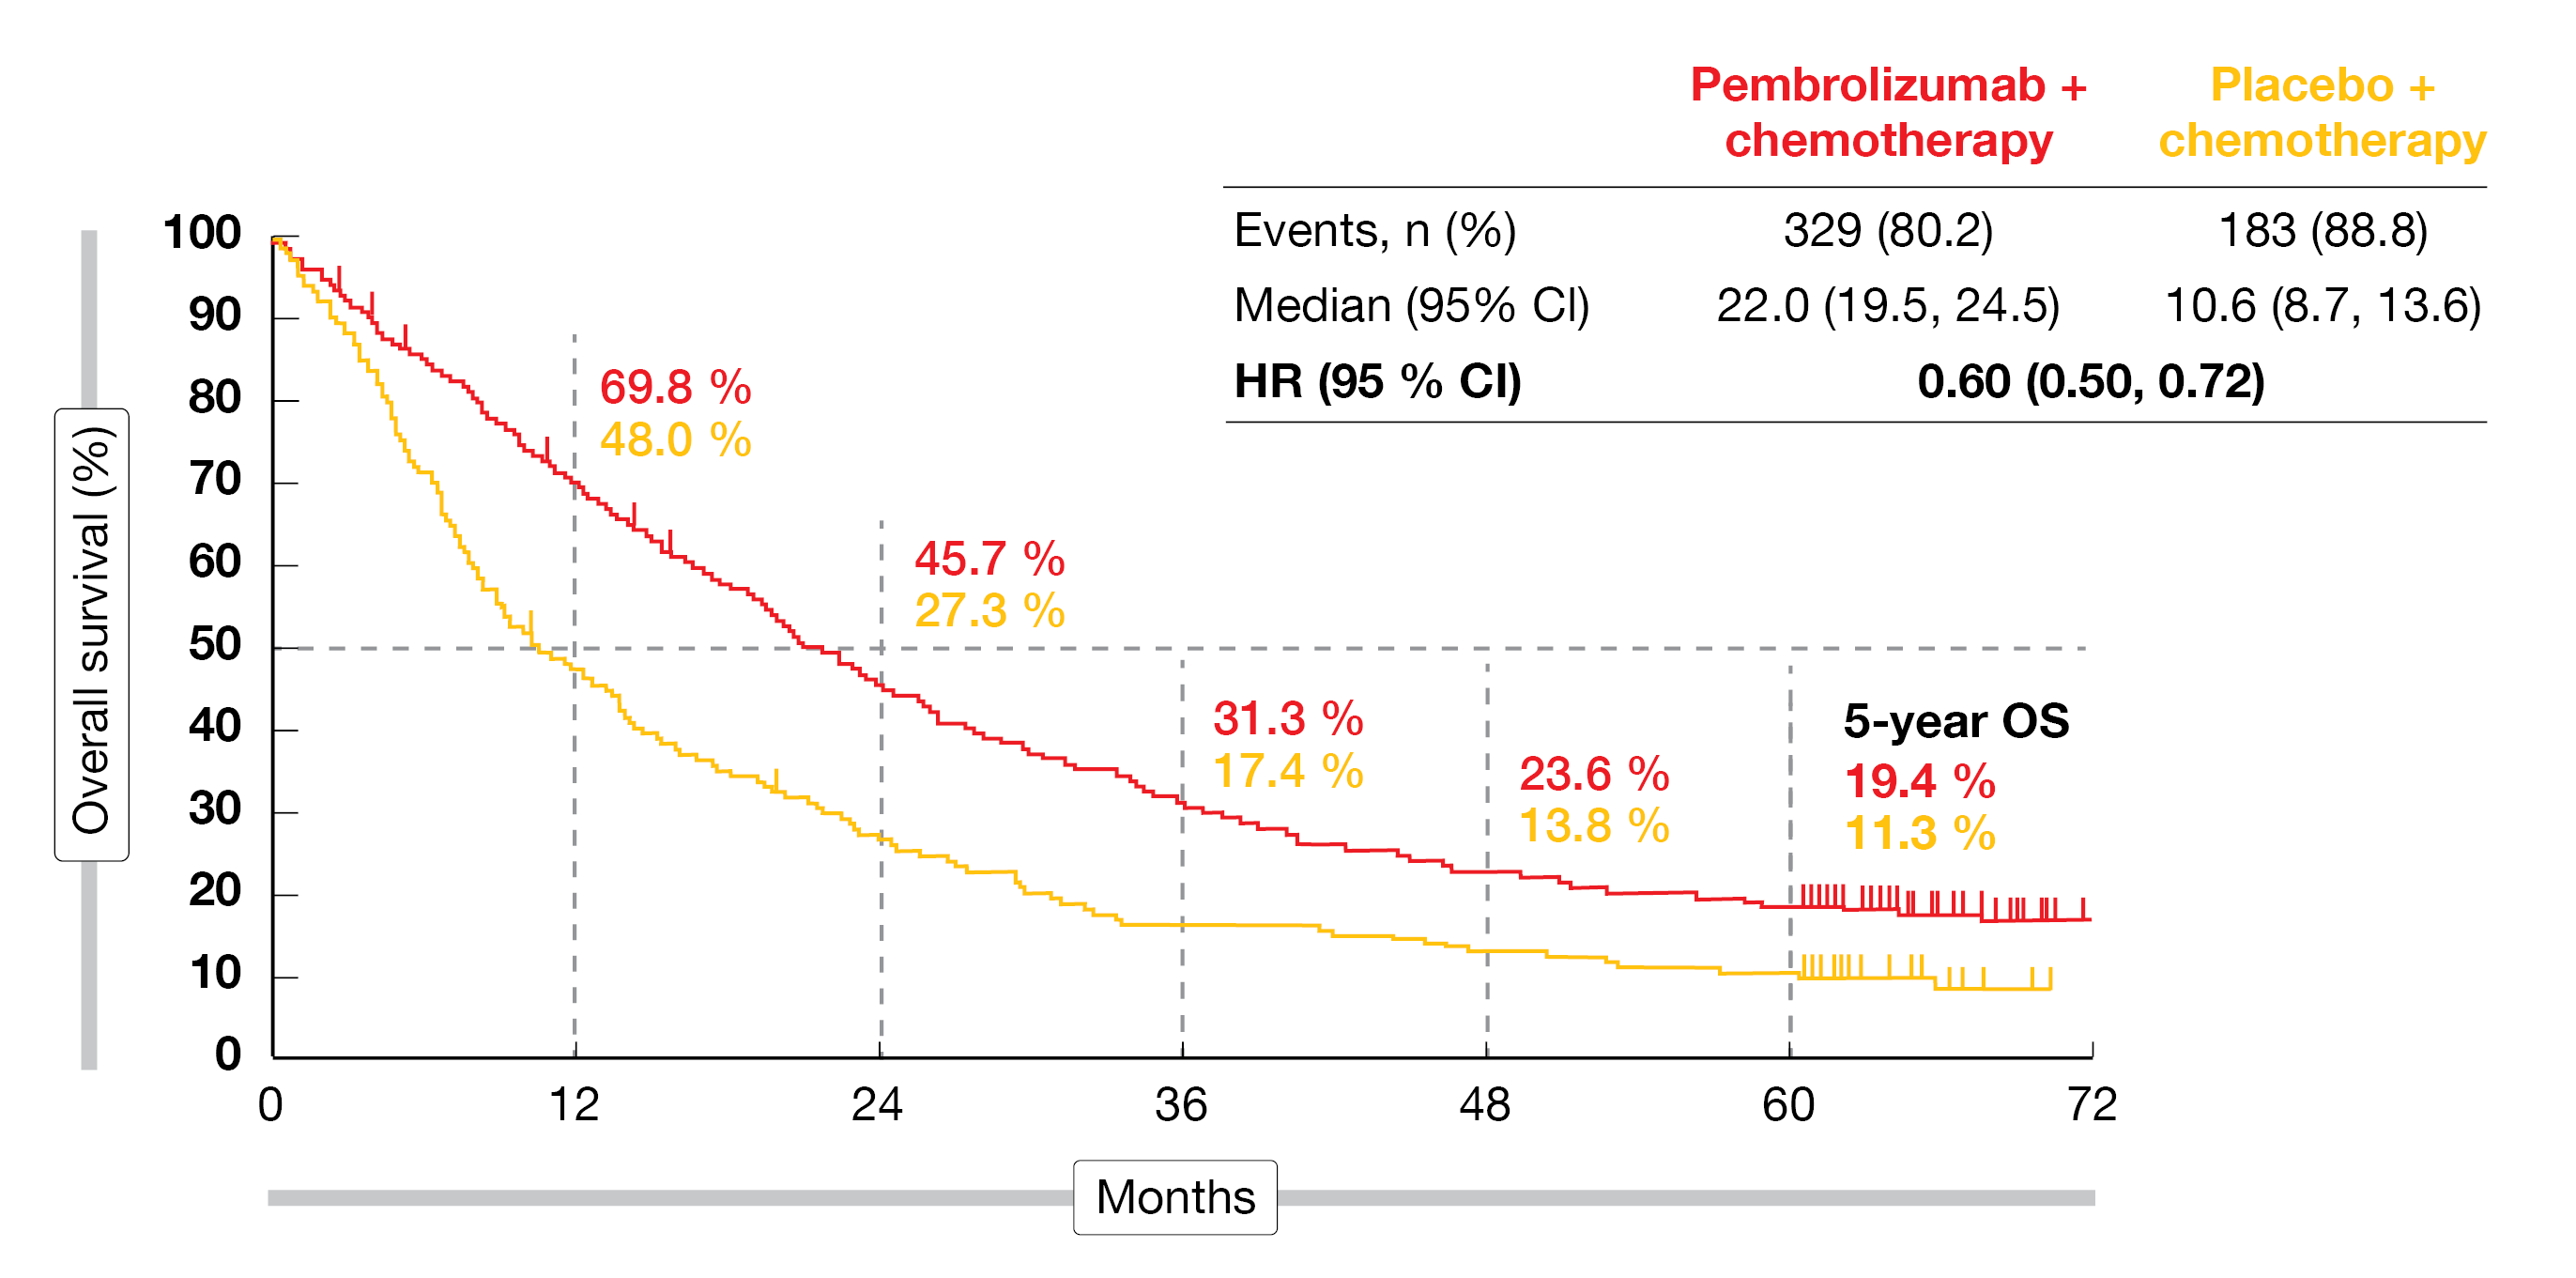 Figure 3: Long-term overall survival in the KEYNOTE-189 trial